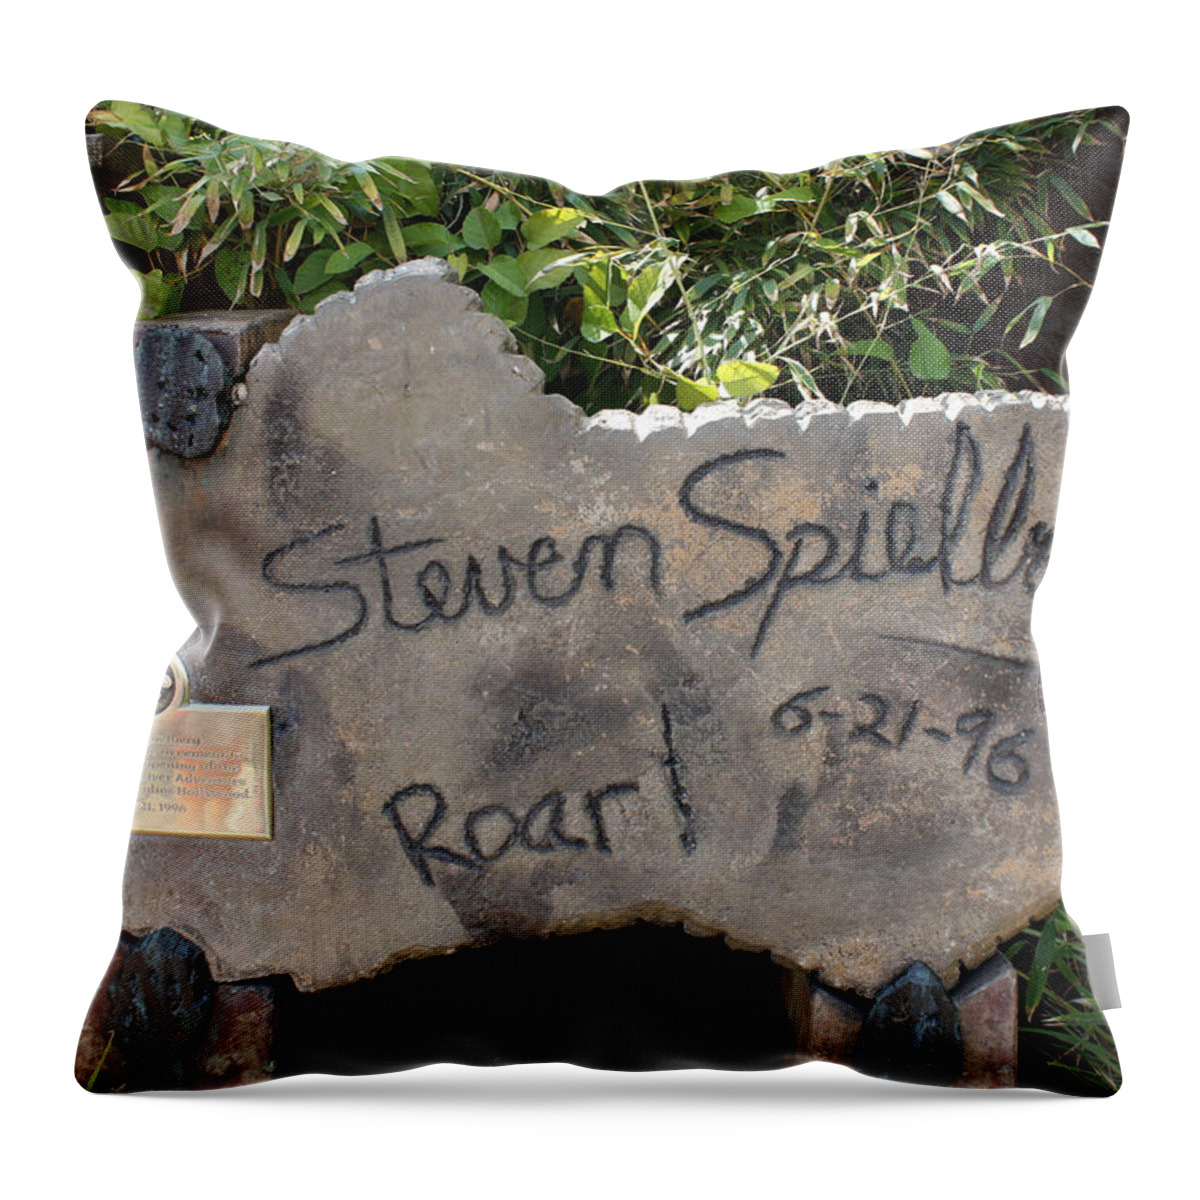 Universal Studios Throw Pillow featuring the photograph Spielberg's Ride by David Nicholls